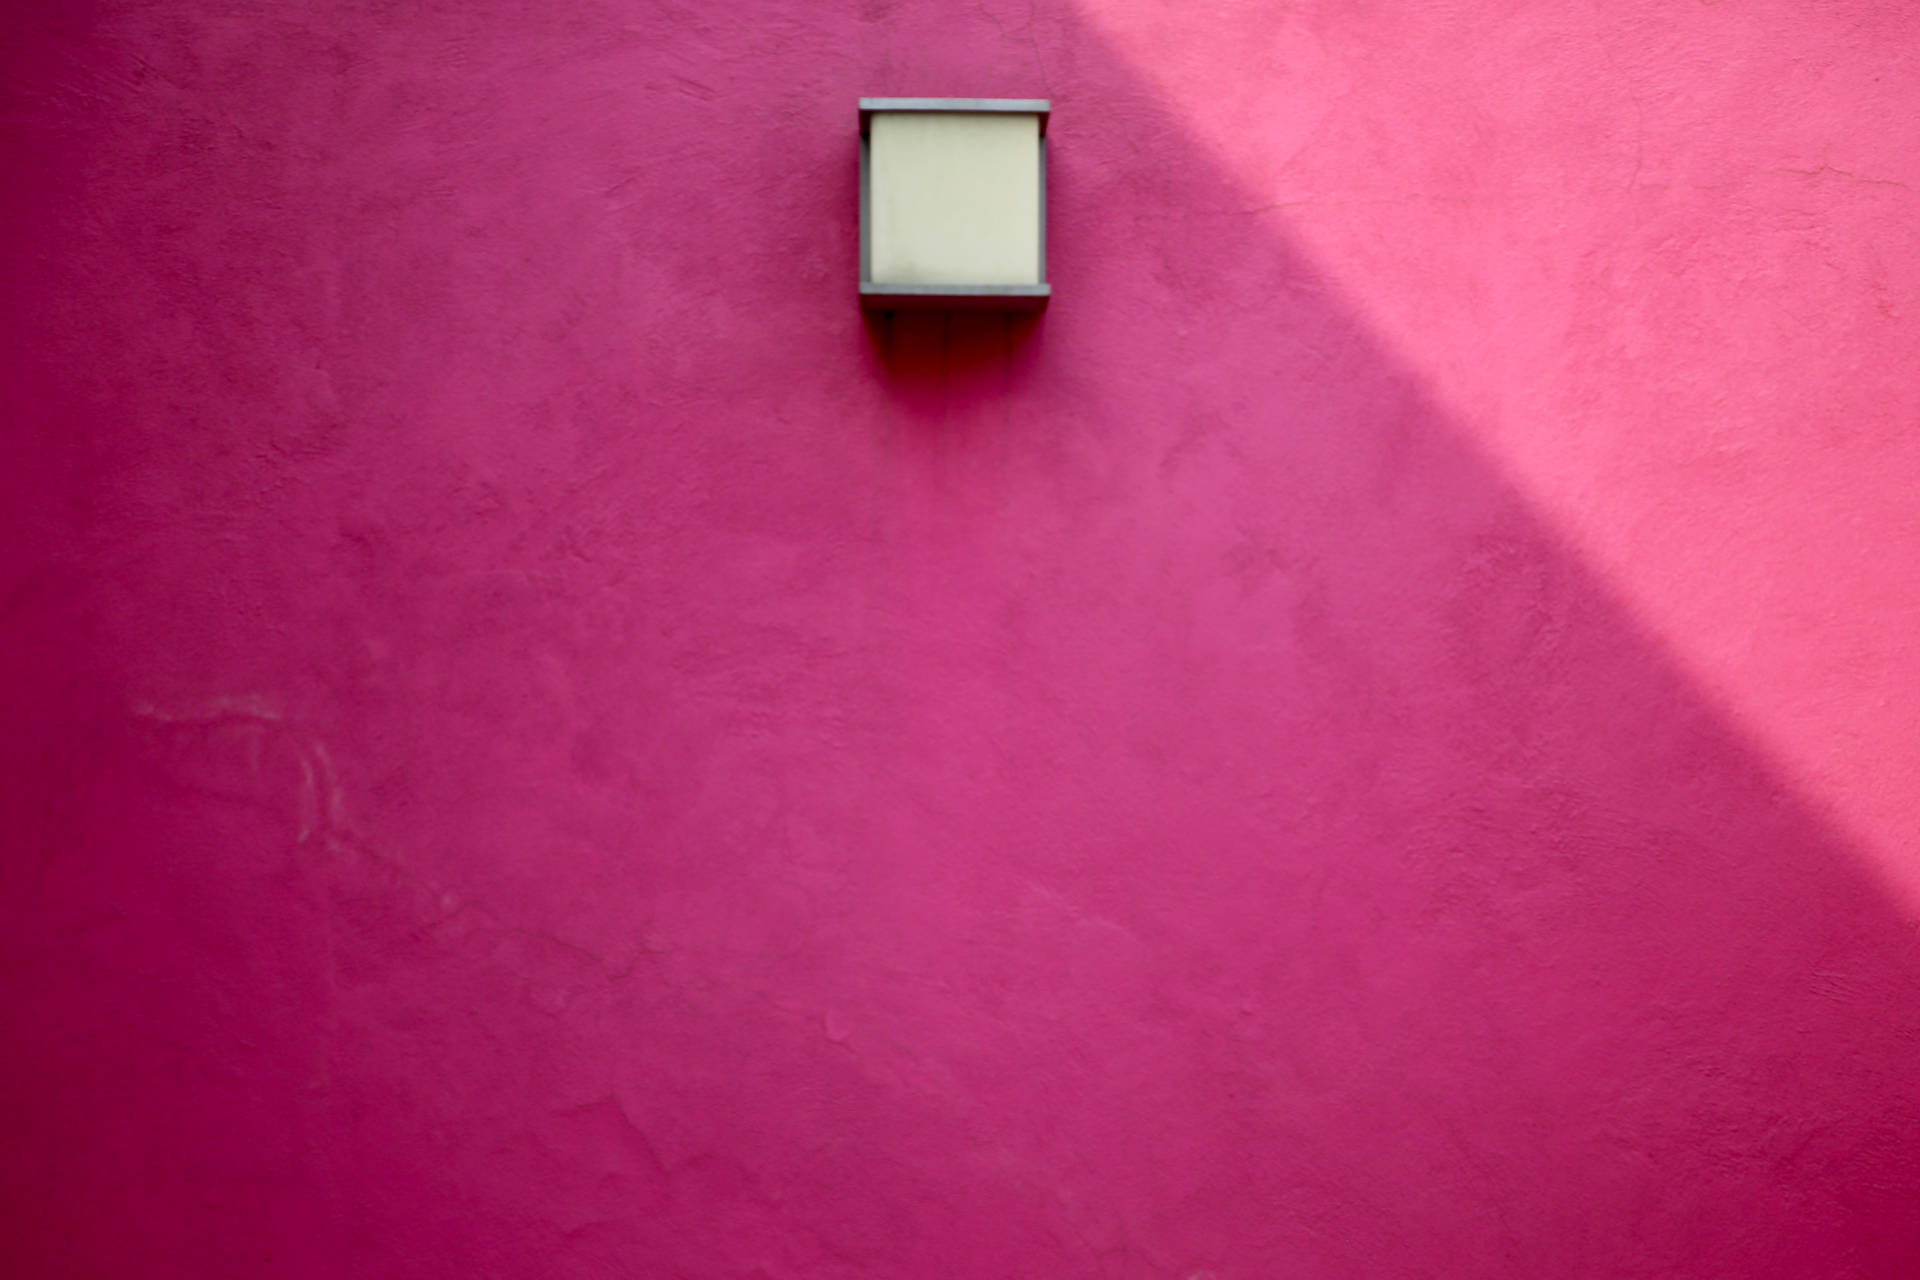 Bright Pink Wall With White Box Background